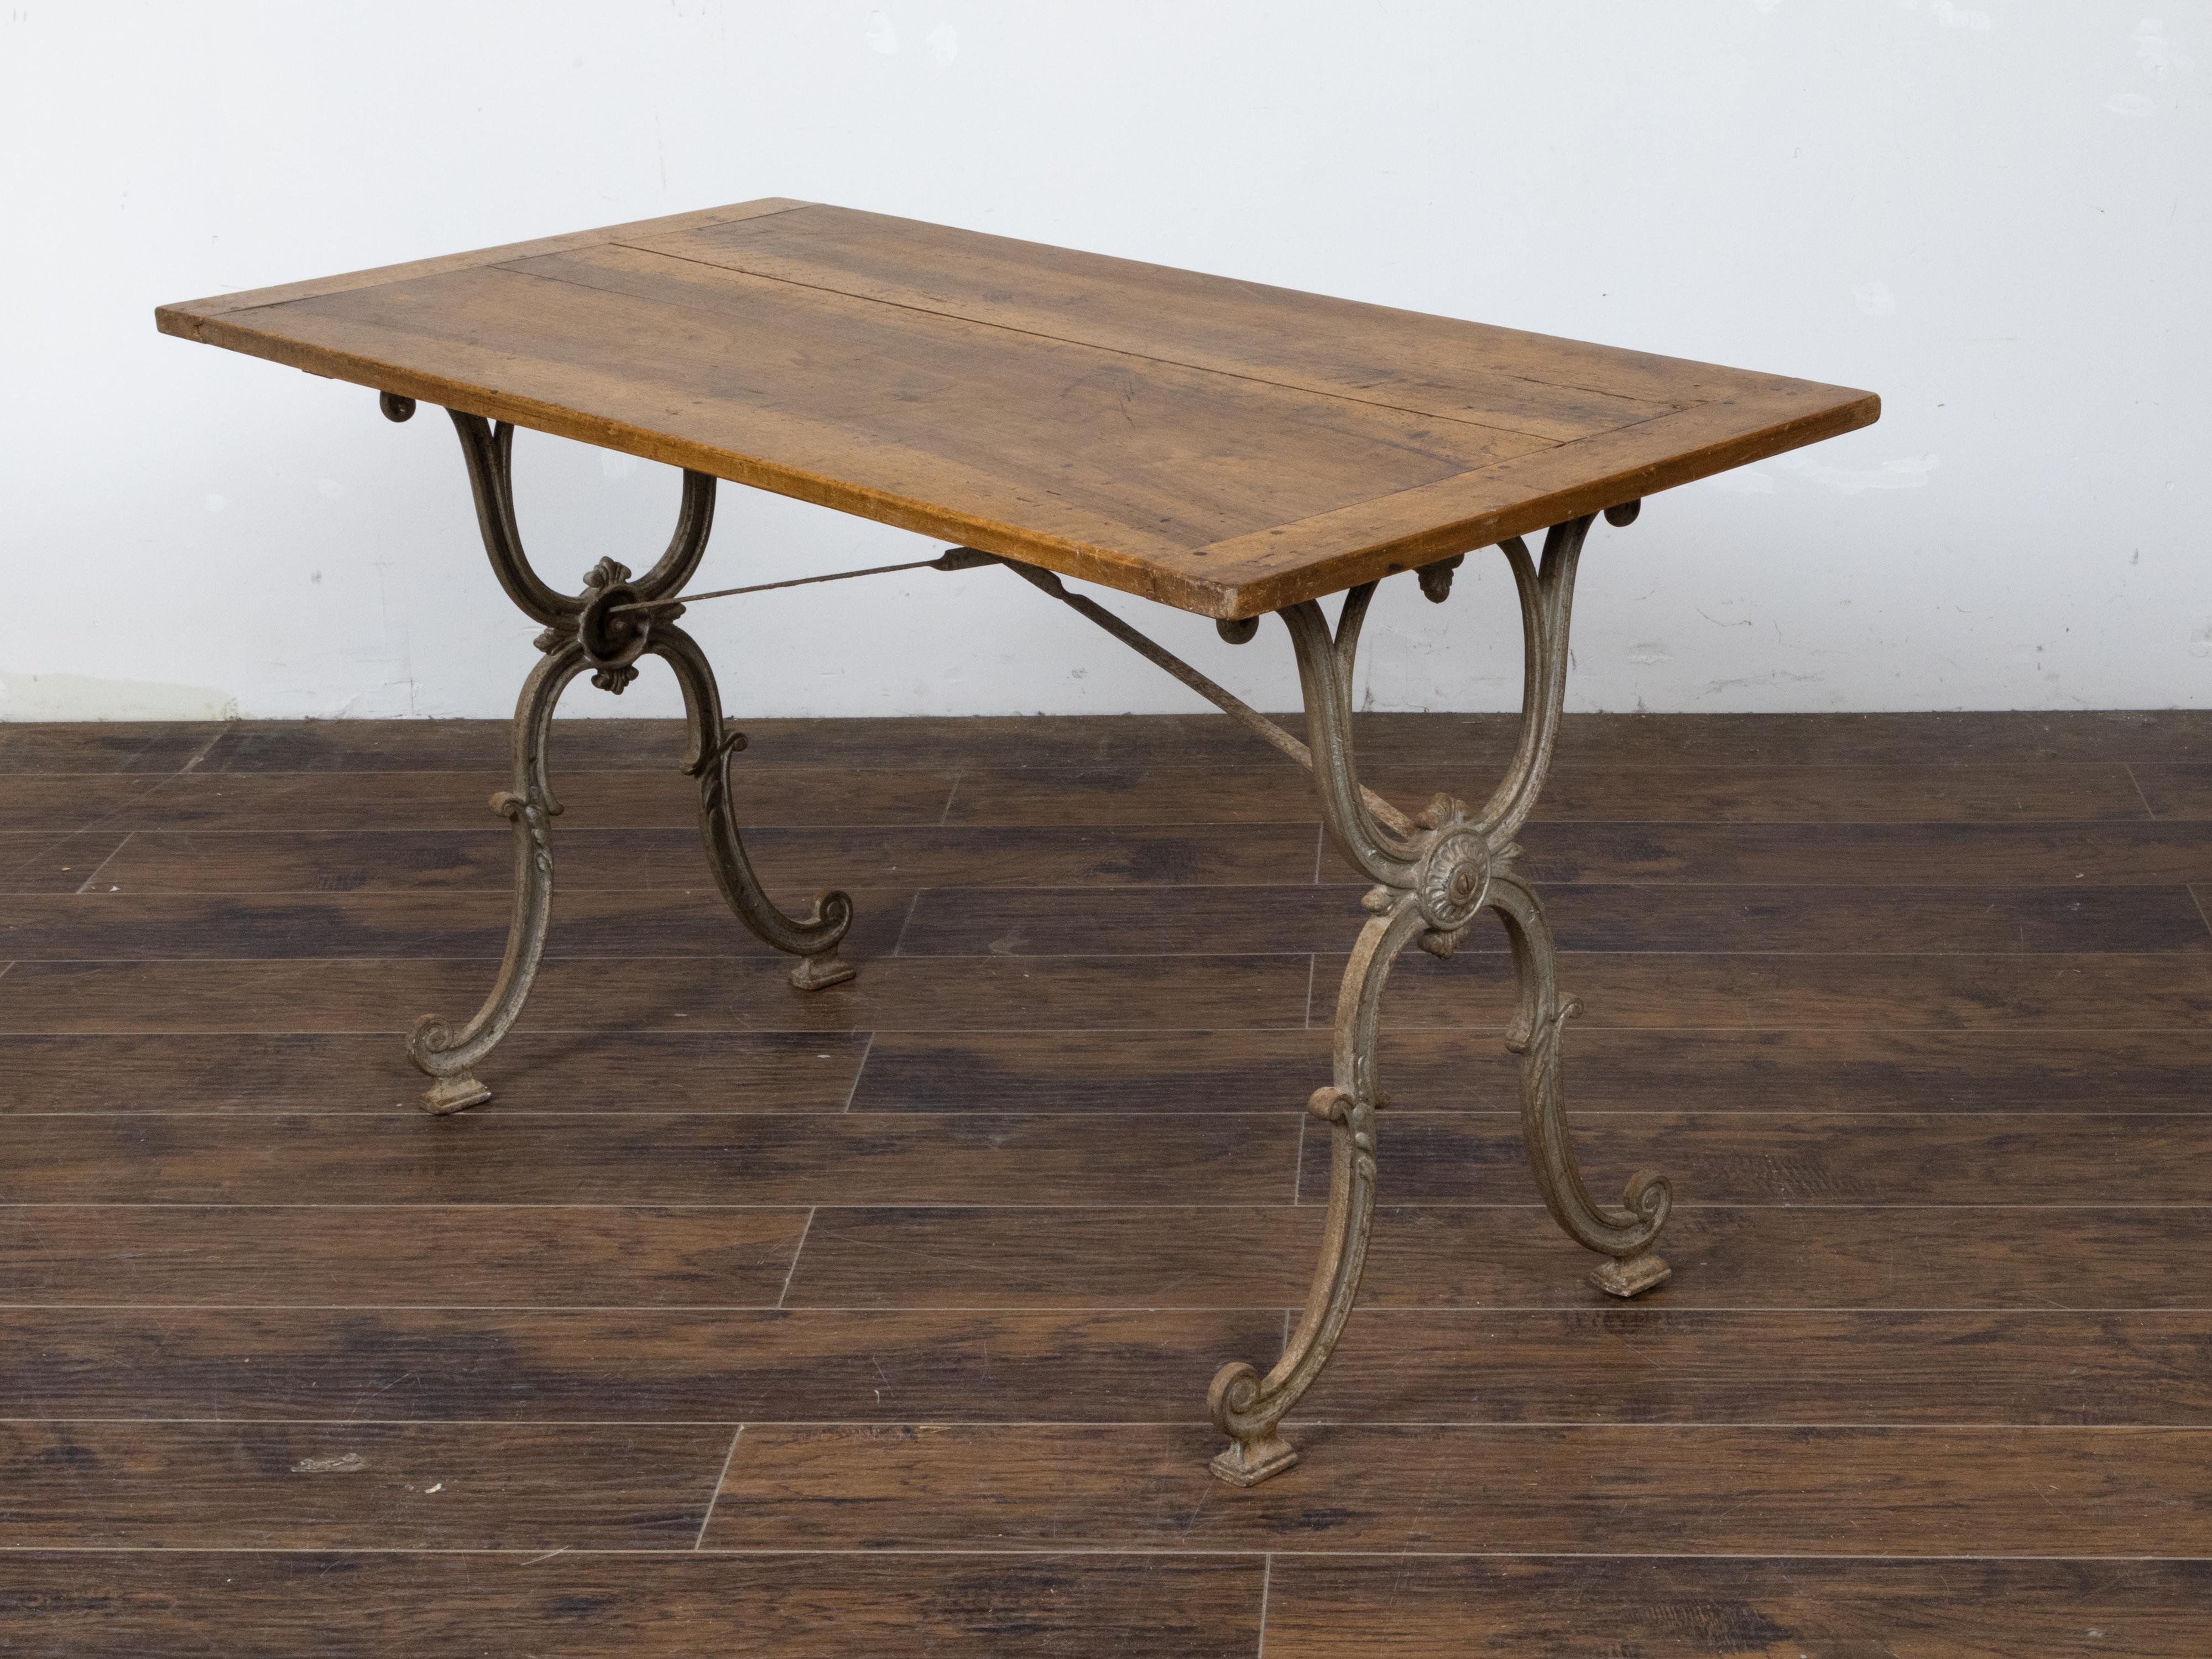 French 1900s Steel and Wood Console Table with Curving X-Form Legs and Stretcher For Sale 2